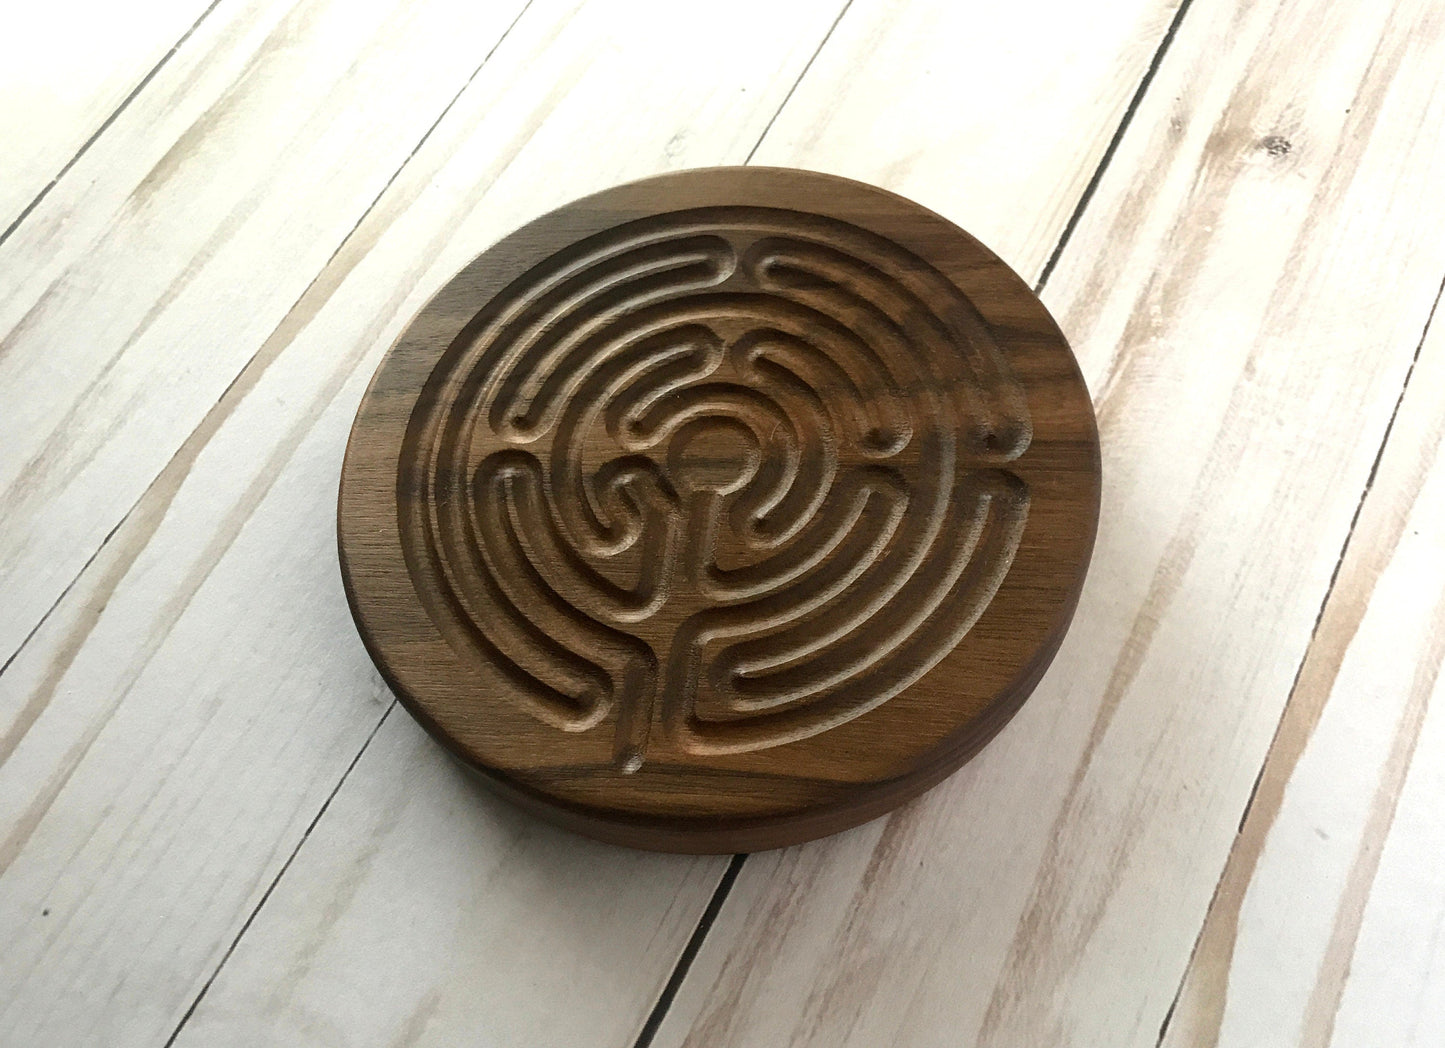 Small Chartres-style Finger Labyrinth, Walnut Wood, 4.75" diameter